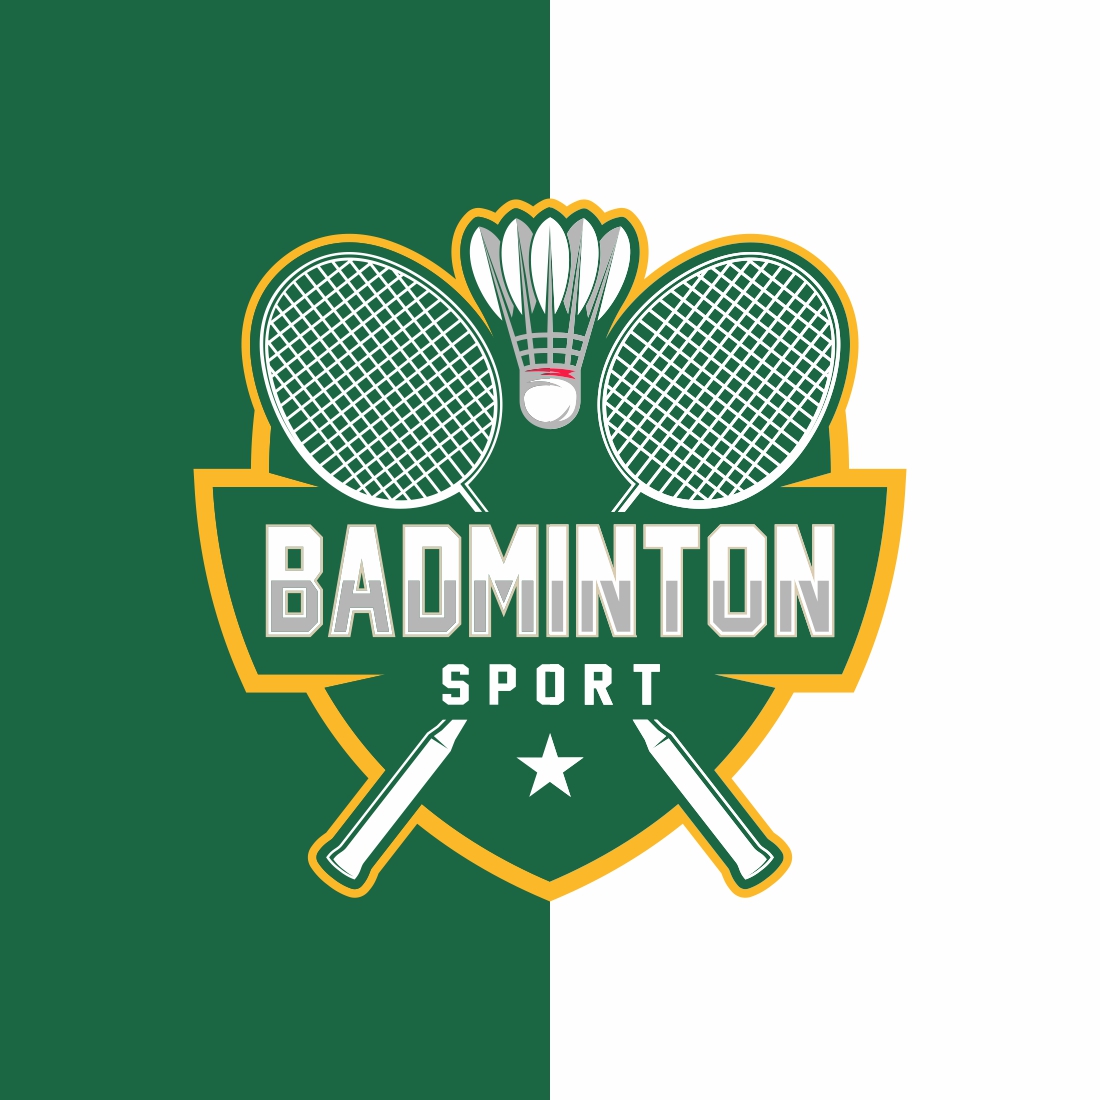 Badminton badge logo in modern minimalist style – Only $7 cover image.